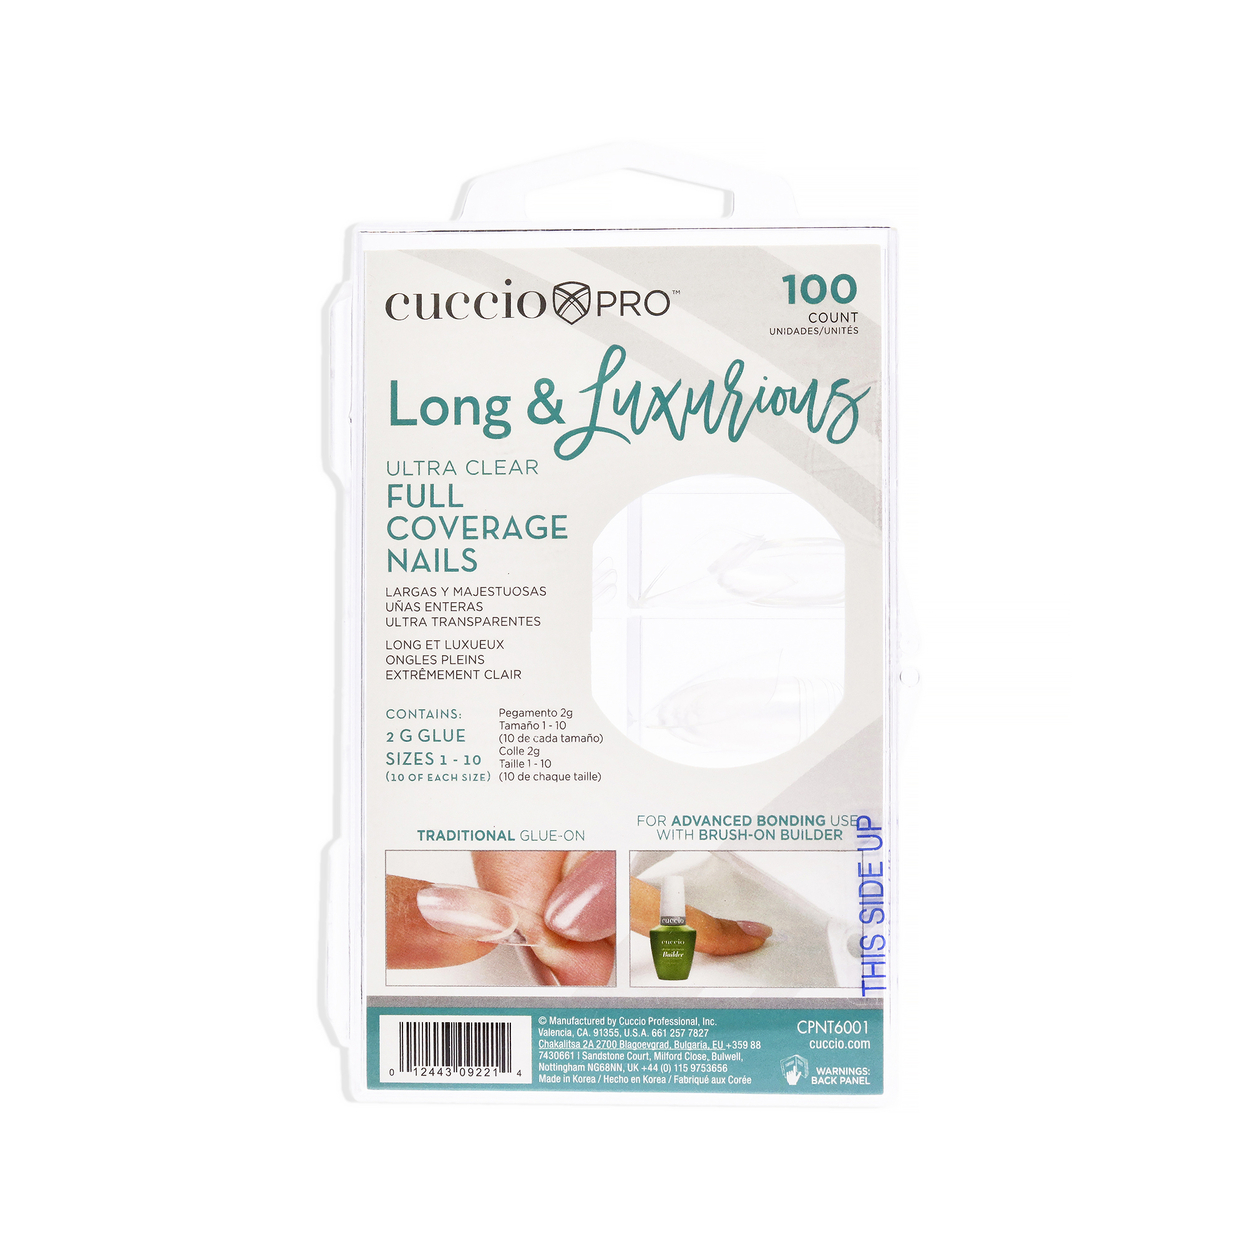 Cuccio Pro Long And Luxurious Full Coverage Nail Tips - Ultra Clear 100 Count